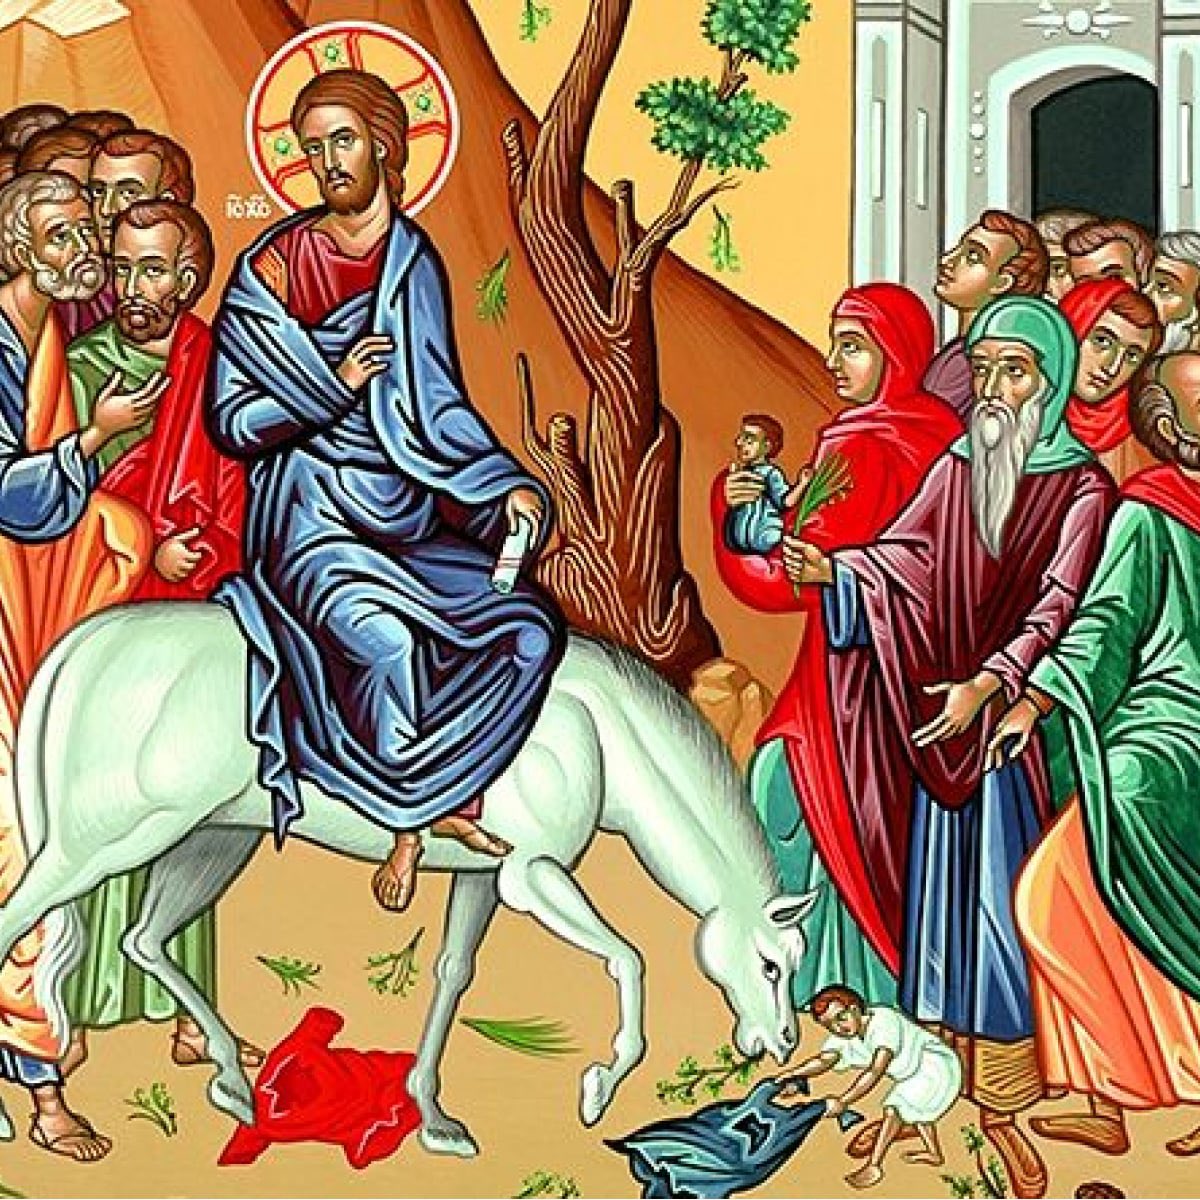 Imagine the joyful and triumphant entry of Jesus into Jerusalem. The cheering crowds line the street along which He approaches, riding upon the foal of an ass. Palm and olive branches are waved aloft, while groups of children cry out: “Hosanna to the Son of David! Blessed is he